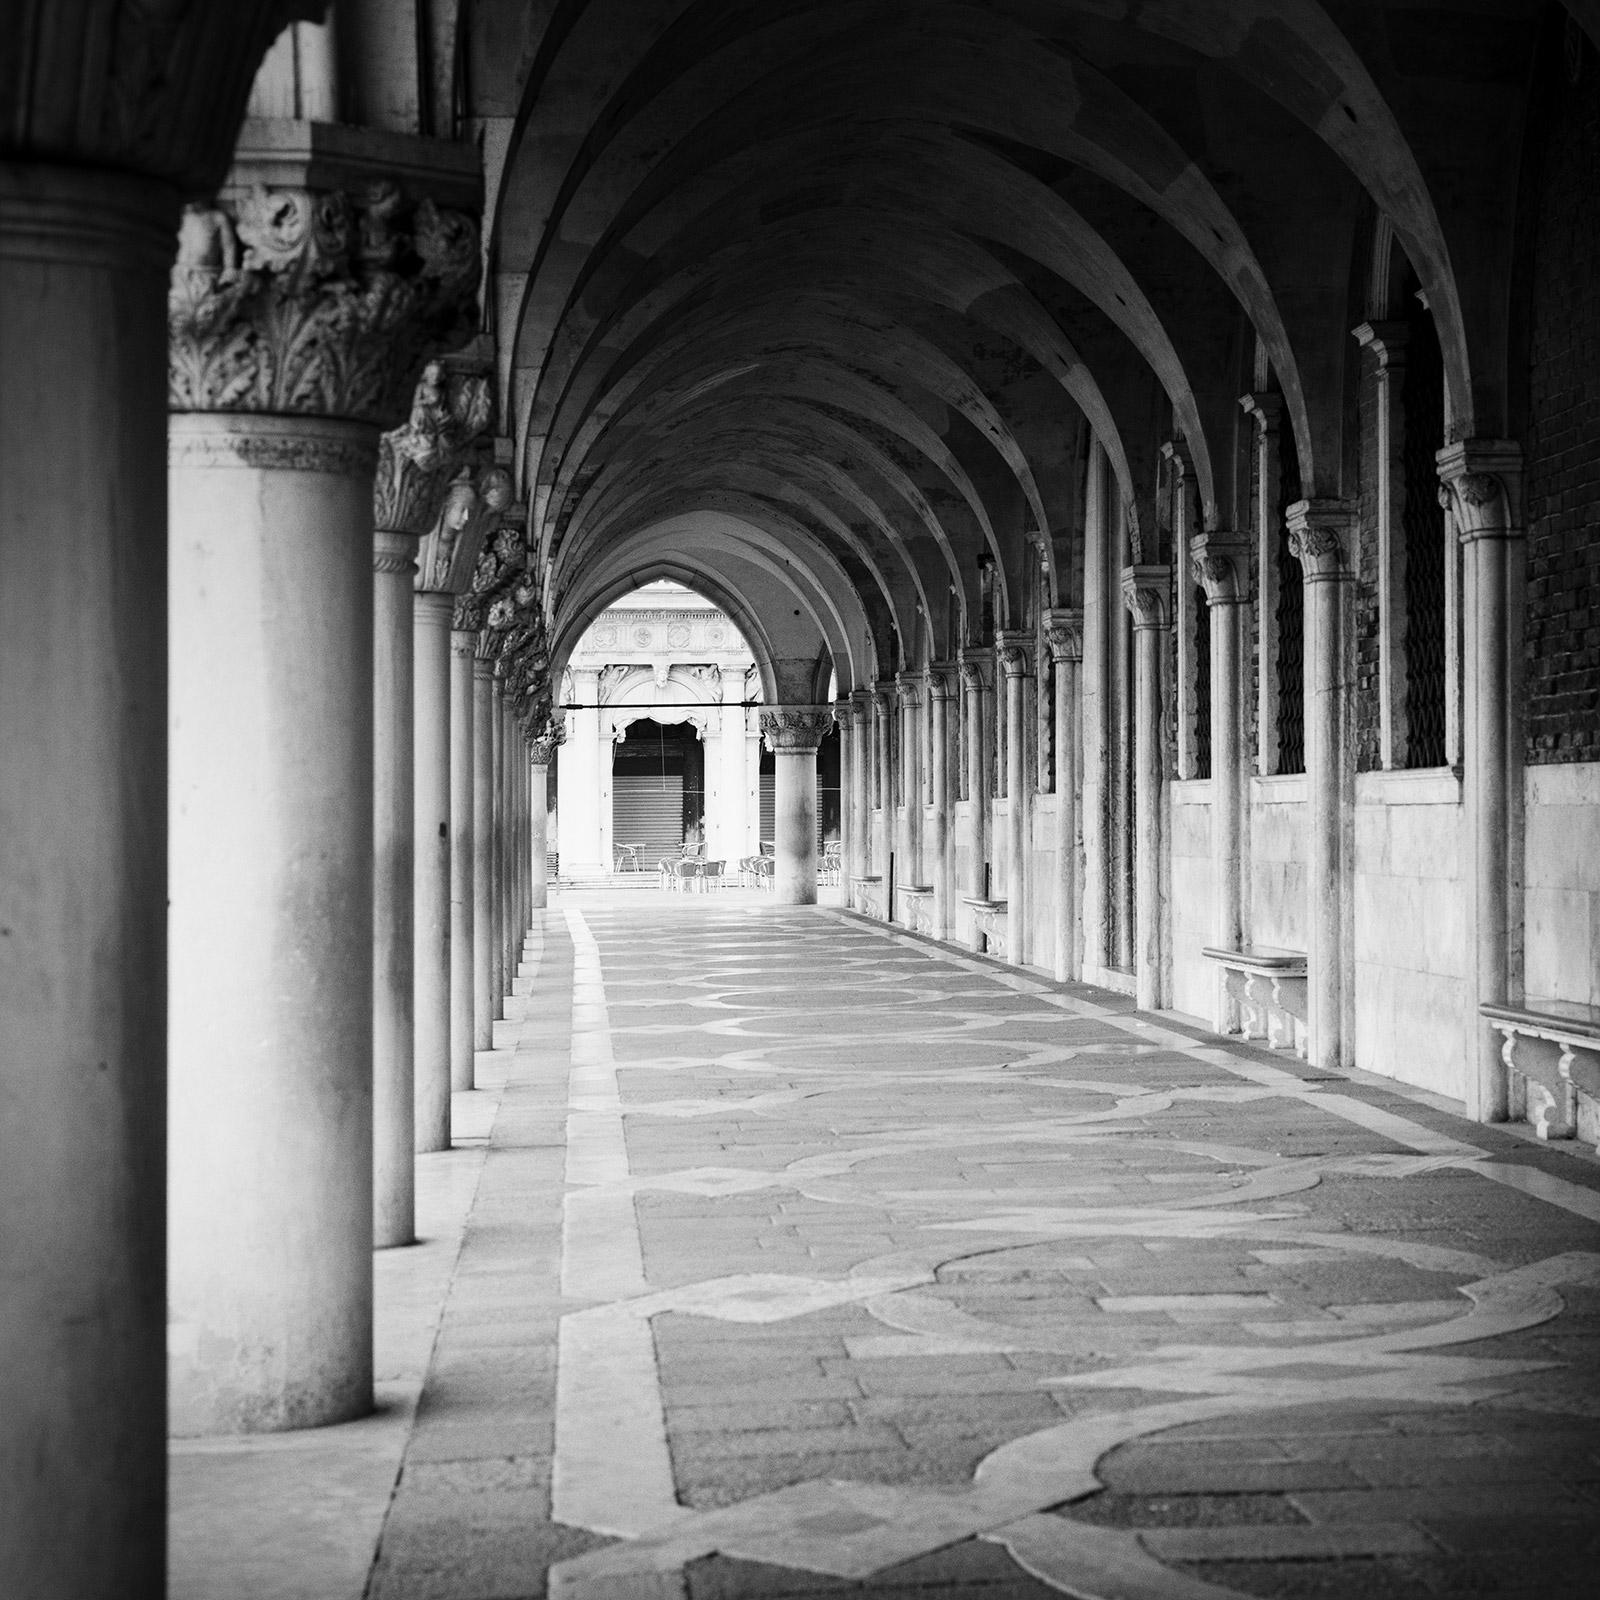 Gerald Berghammer Landscape Photograph - Doges Palace Arcade, Venice, Italy, black and white photography, art cityscape